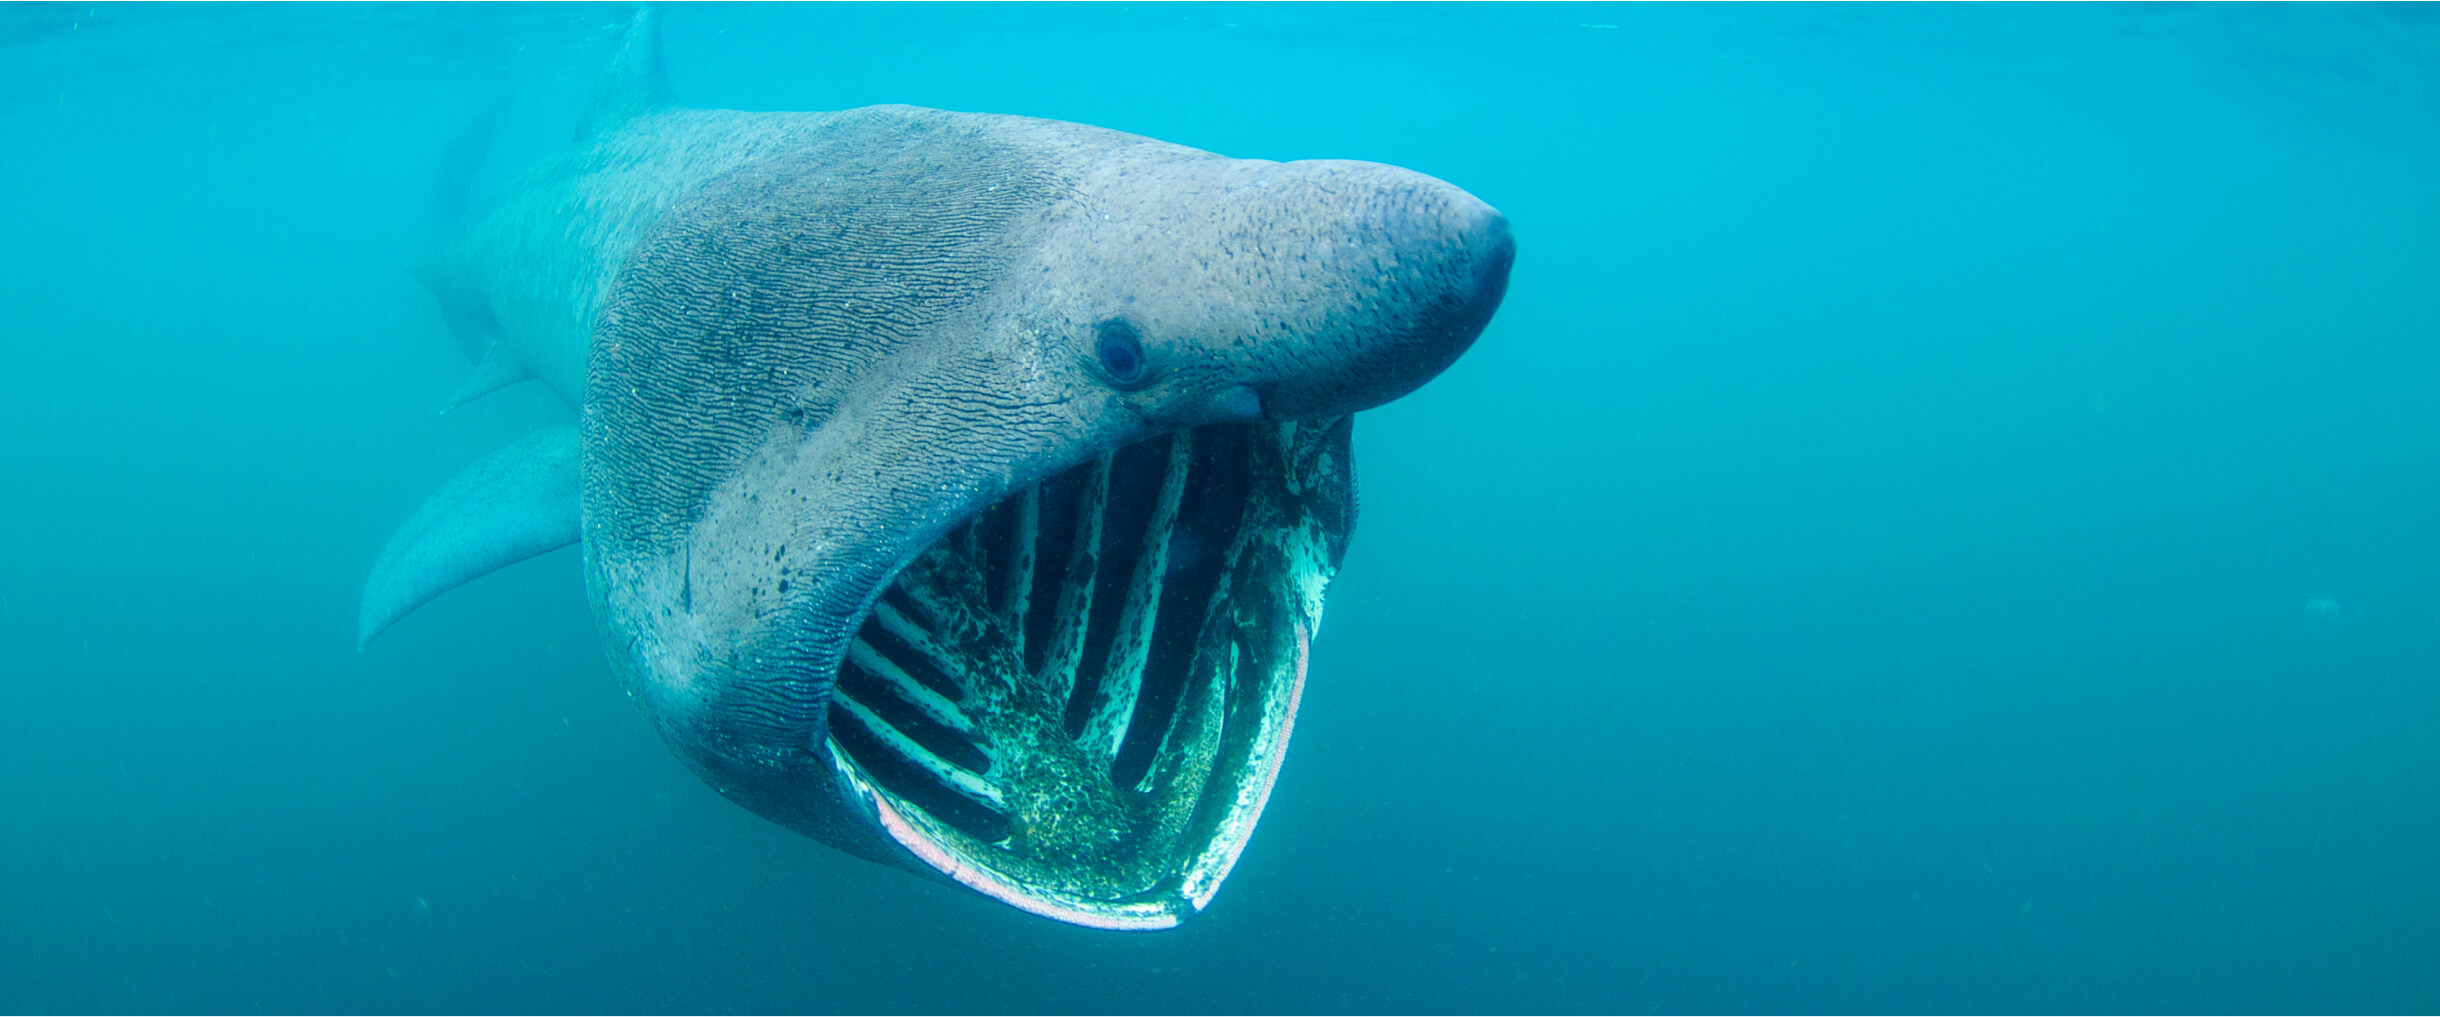 snorkelling with a basking shark from the isle of coll